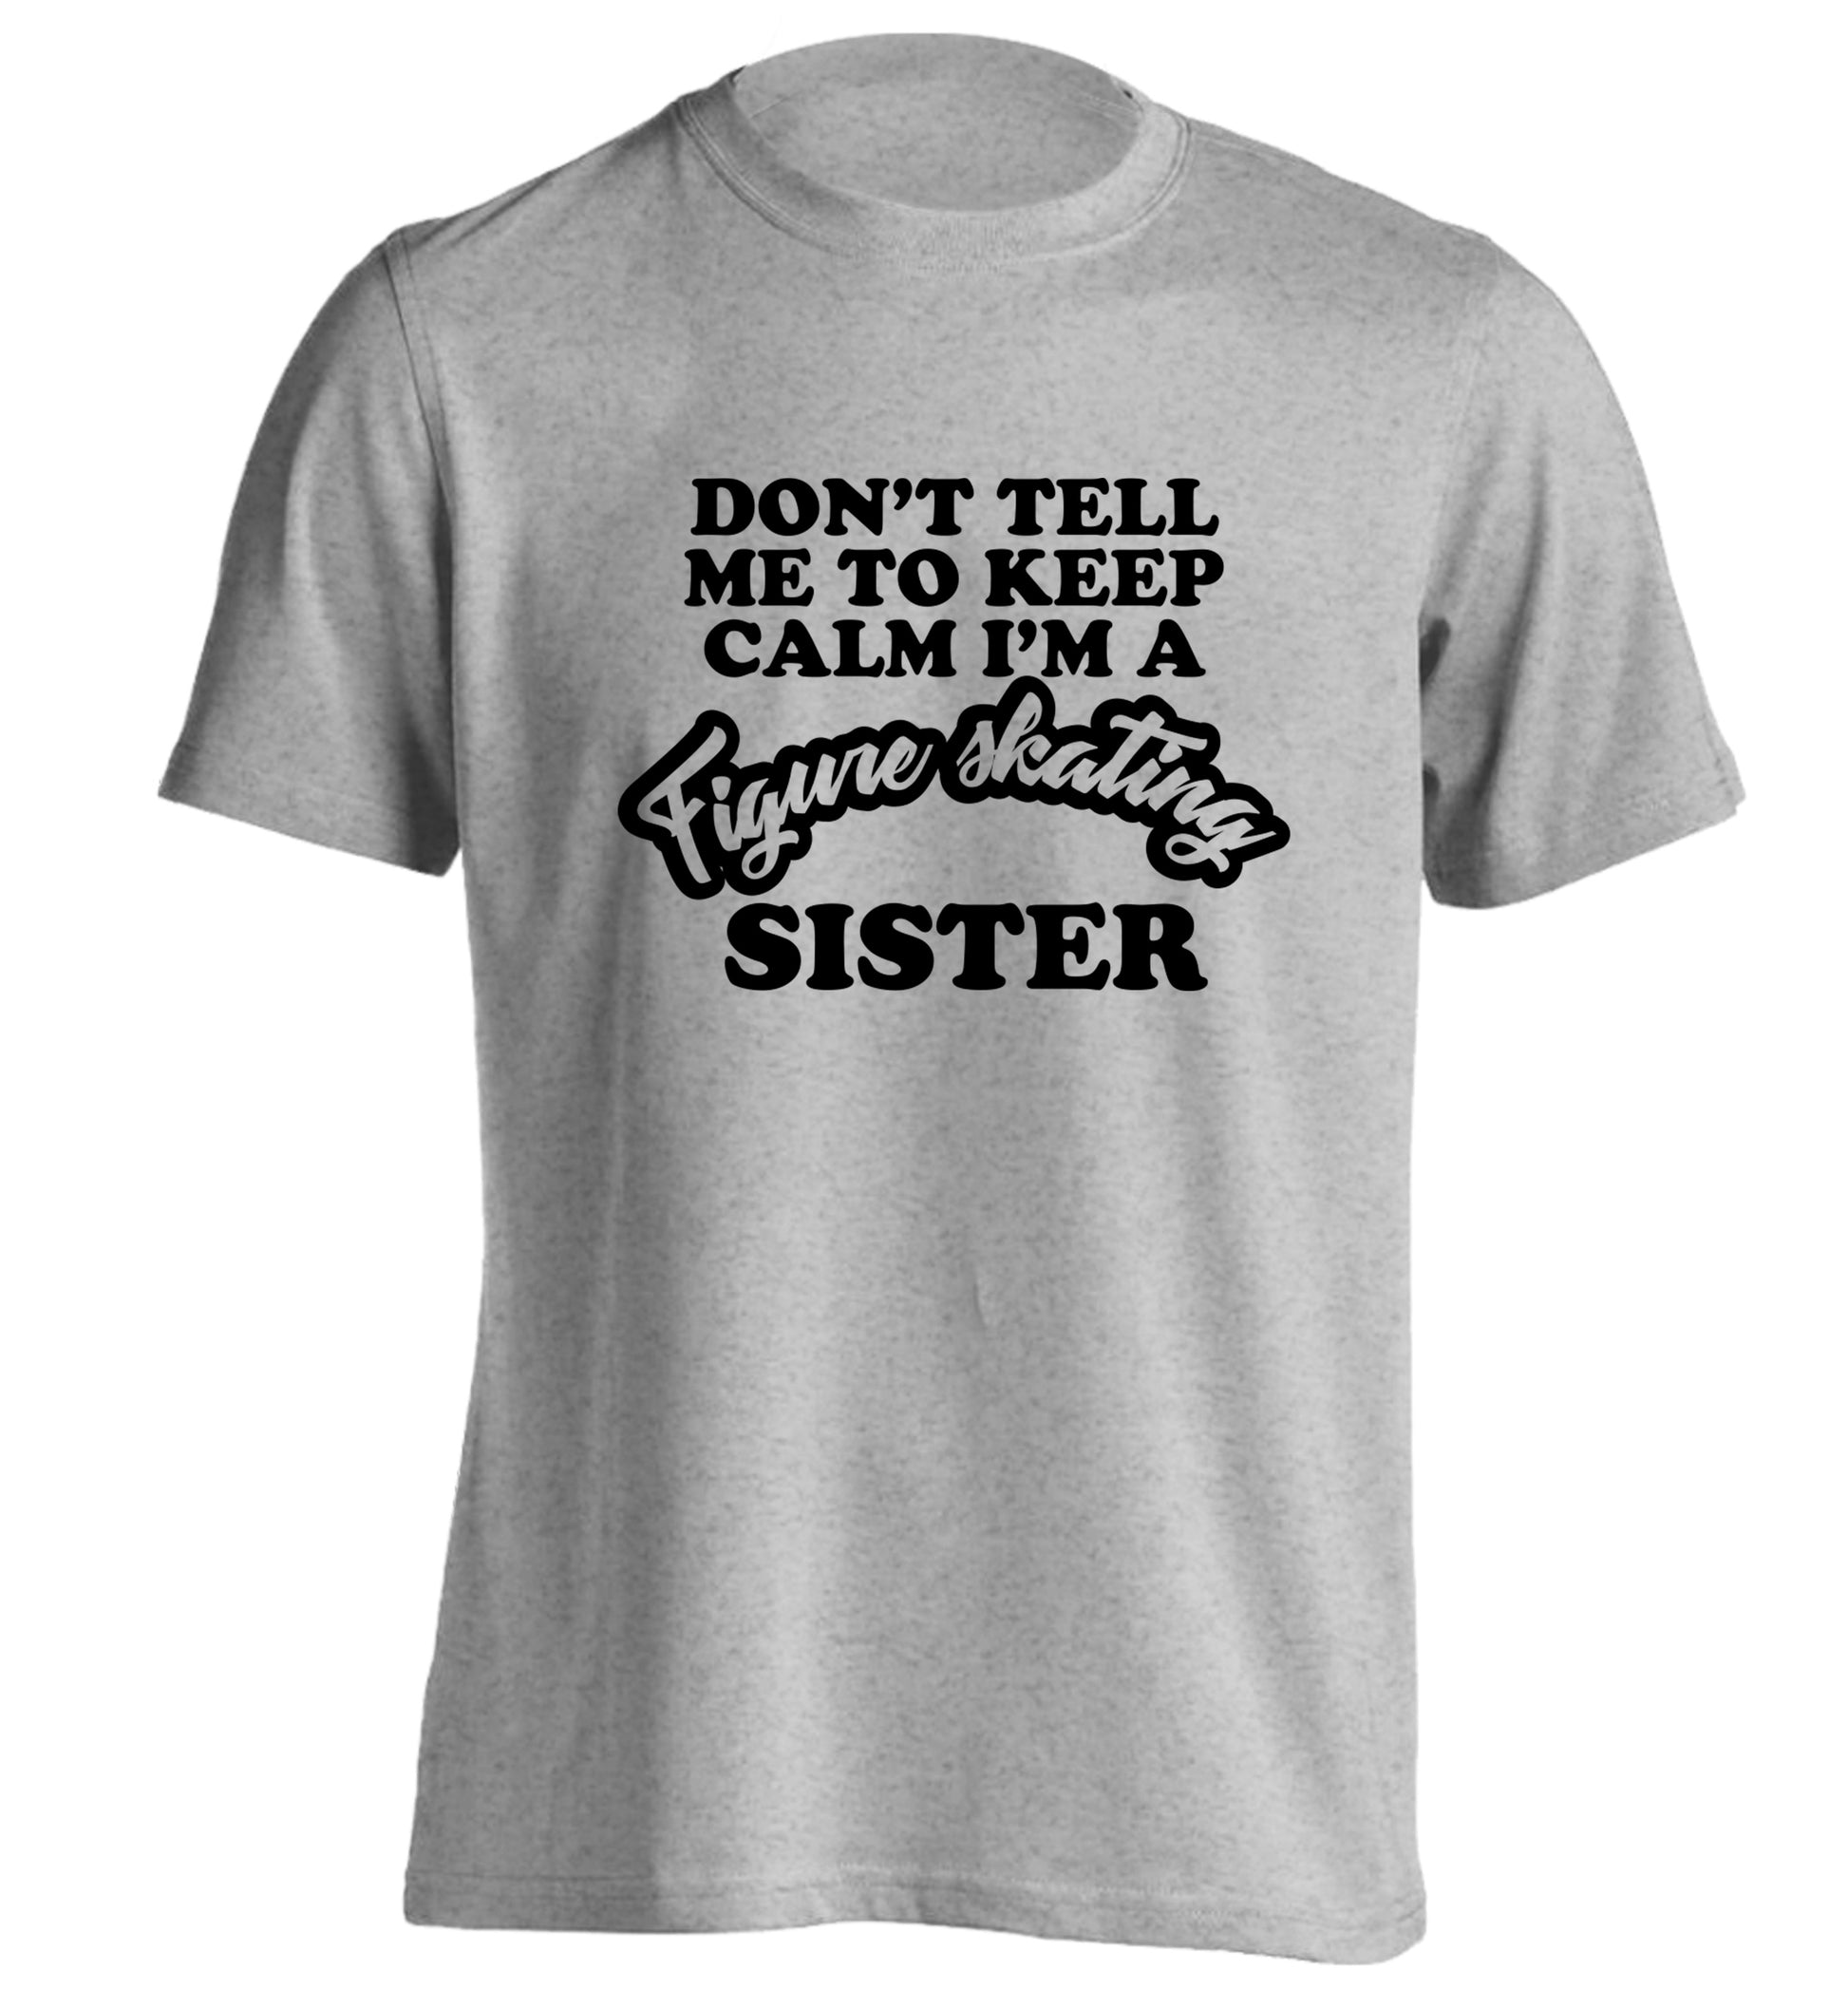 Don't tell me to keep calm I'm a figure skating sister adults unisexgrey Tshirt 2XL